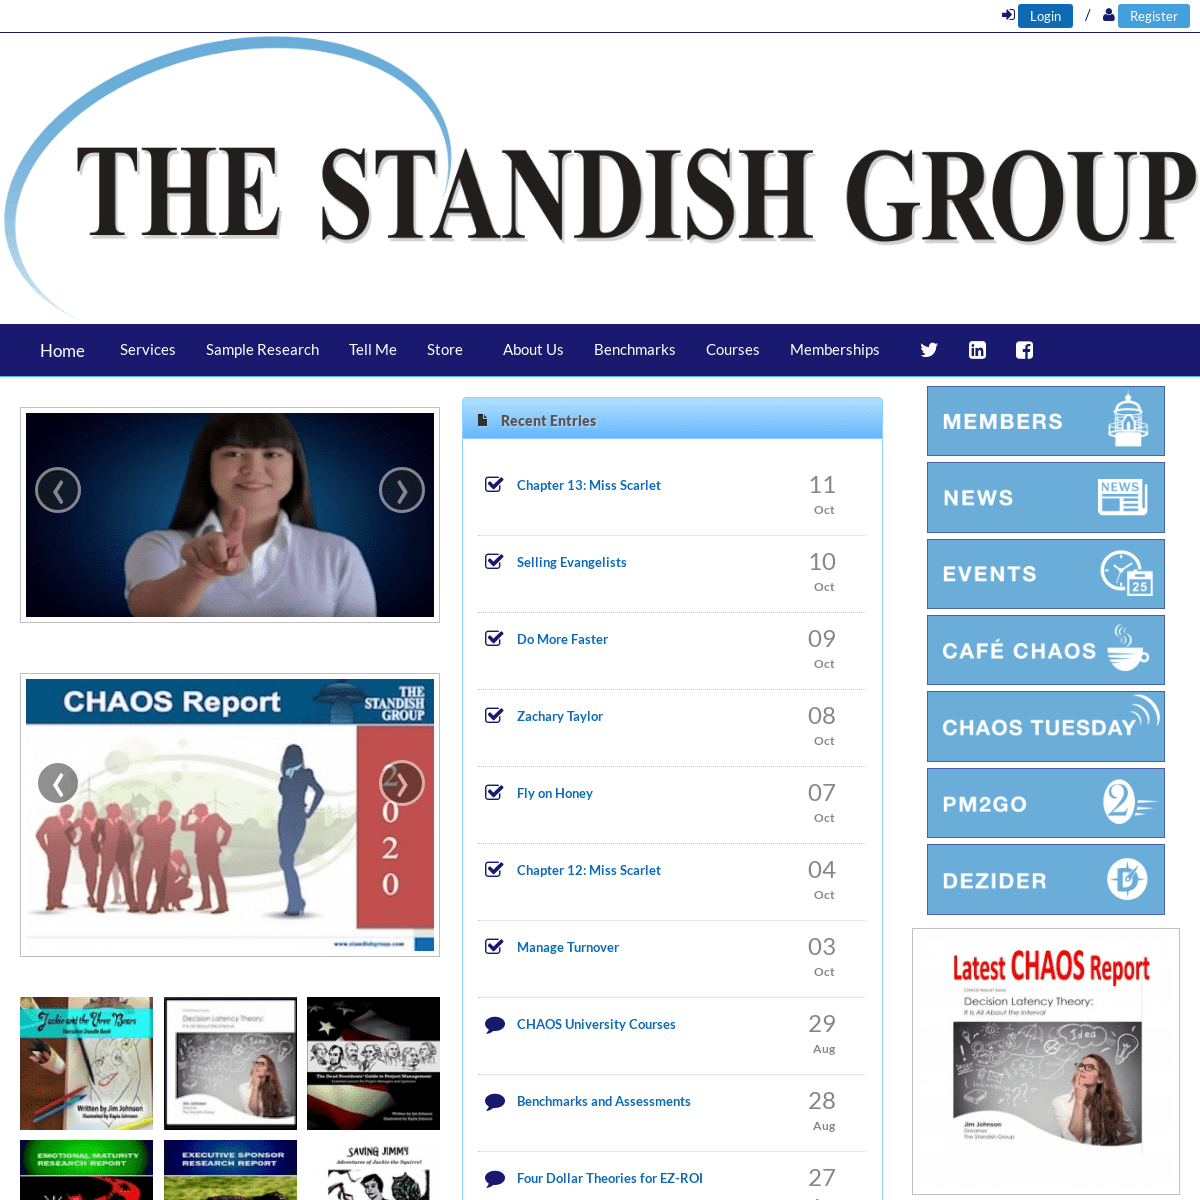 A complete backup of standishgroup.com